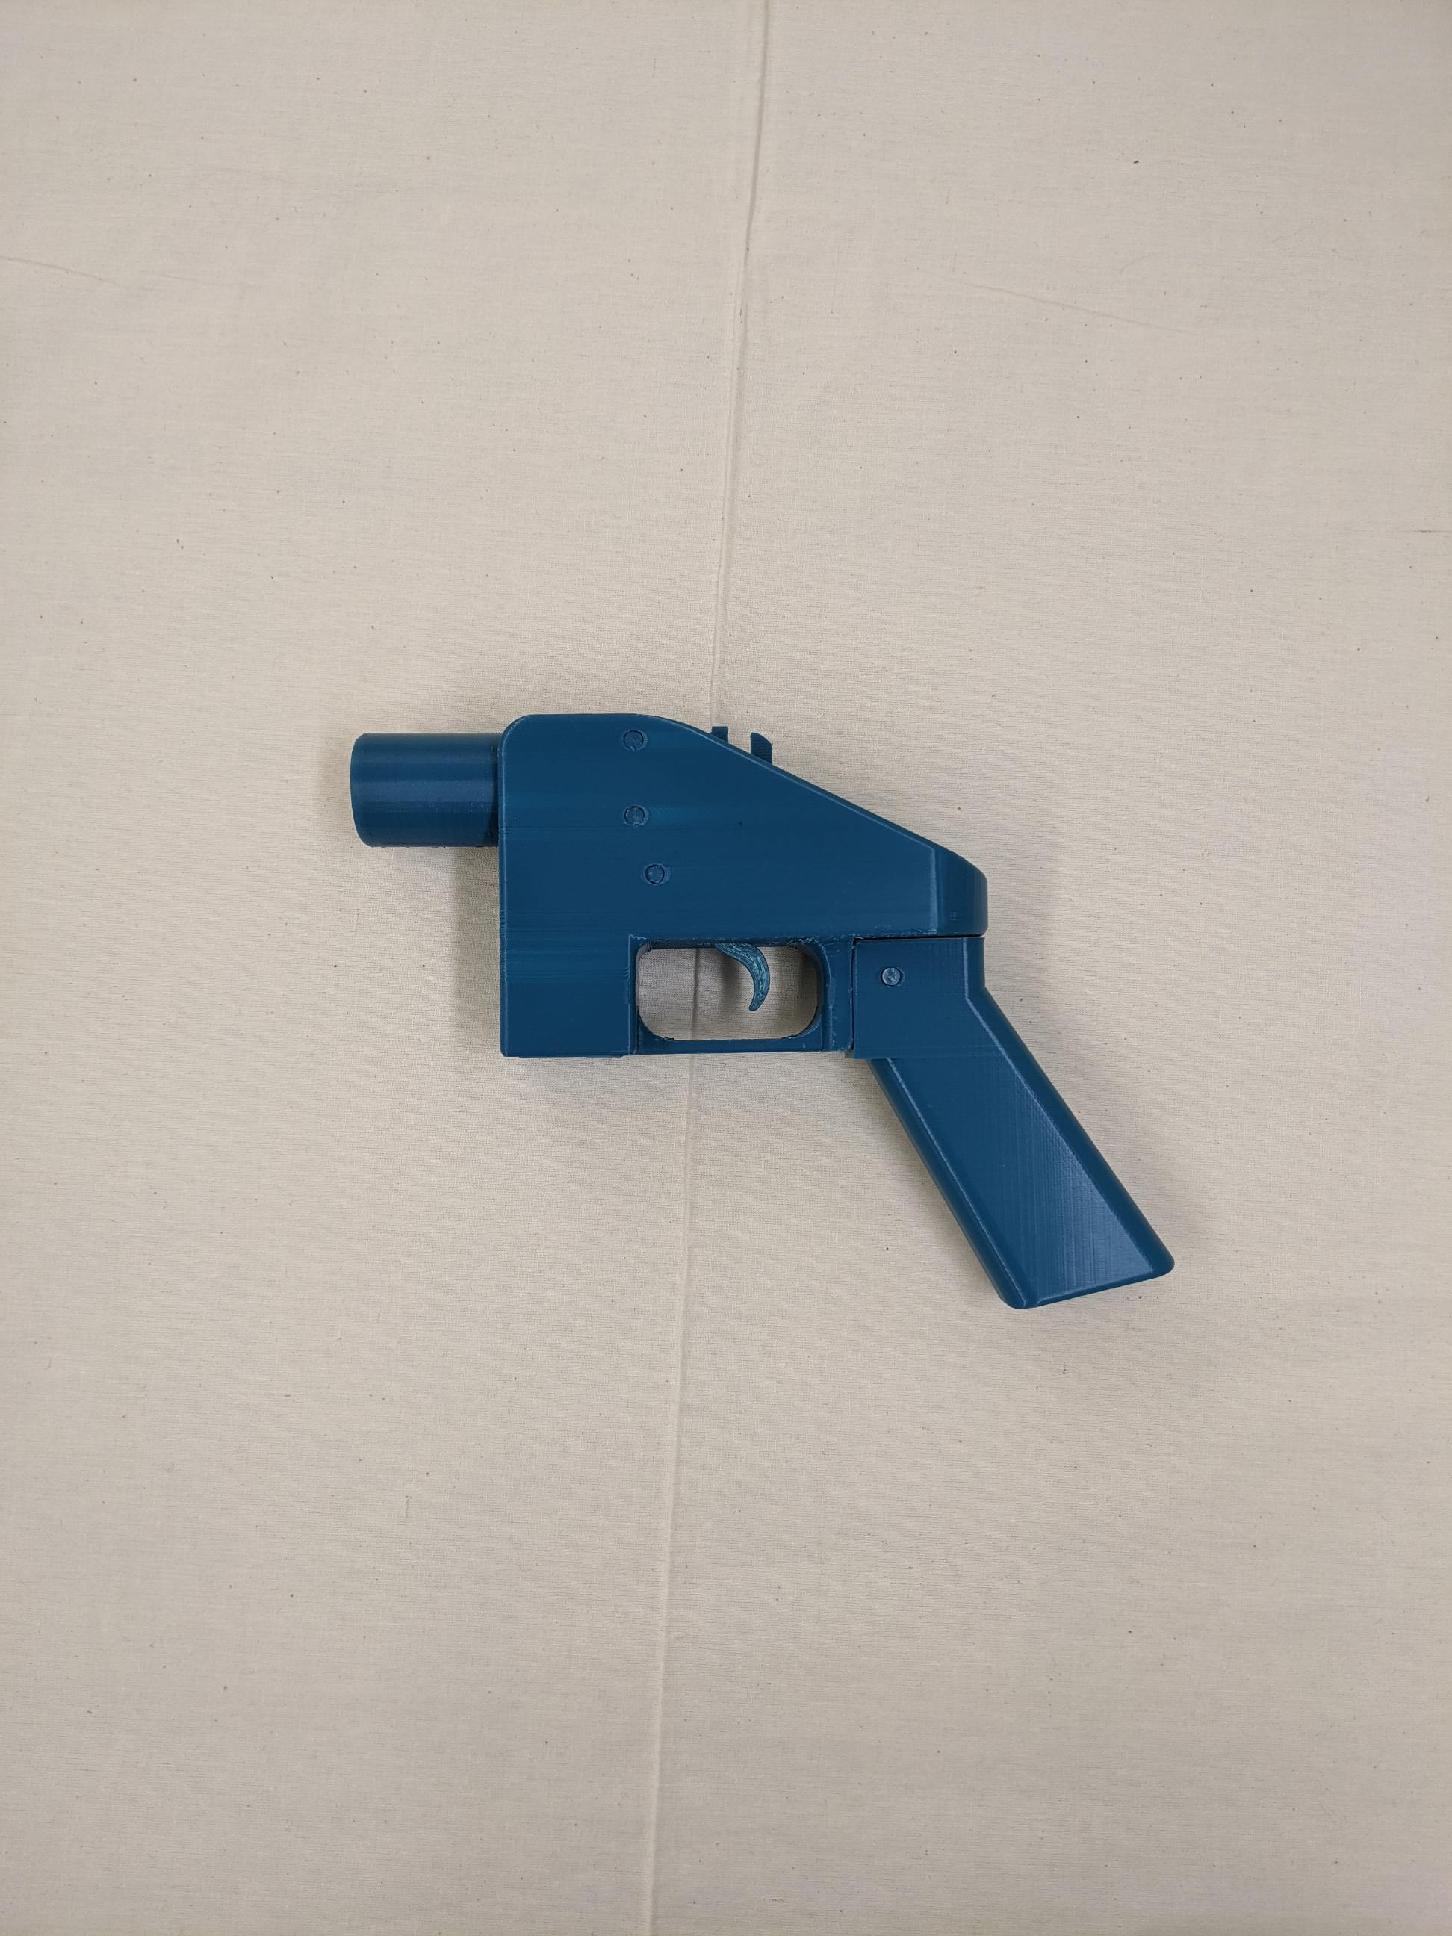 A 3D printed Liberator pistol: does it reflect current trends in firearms?